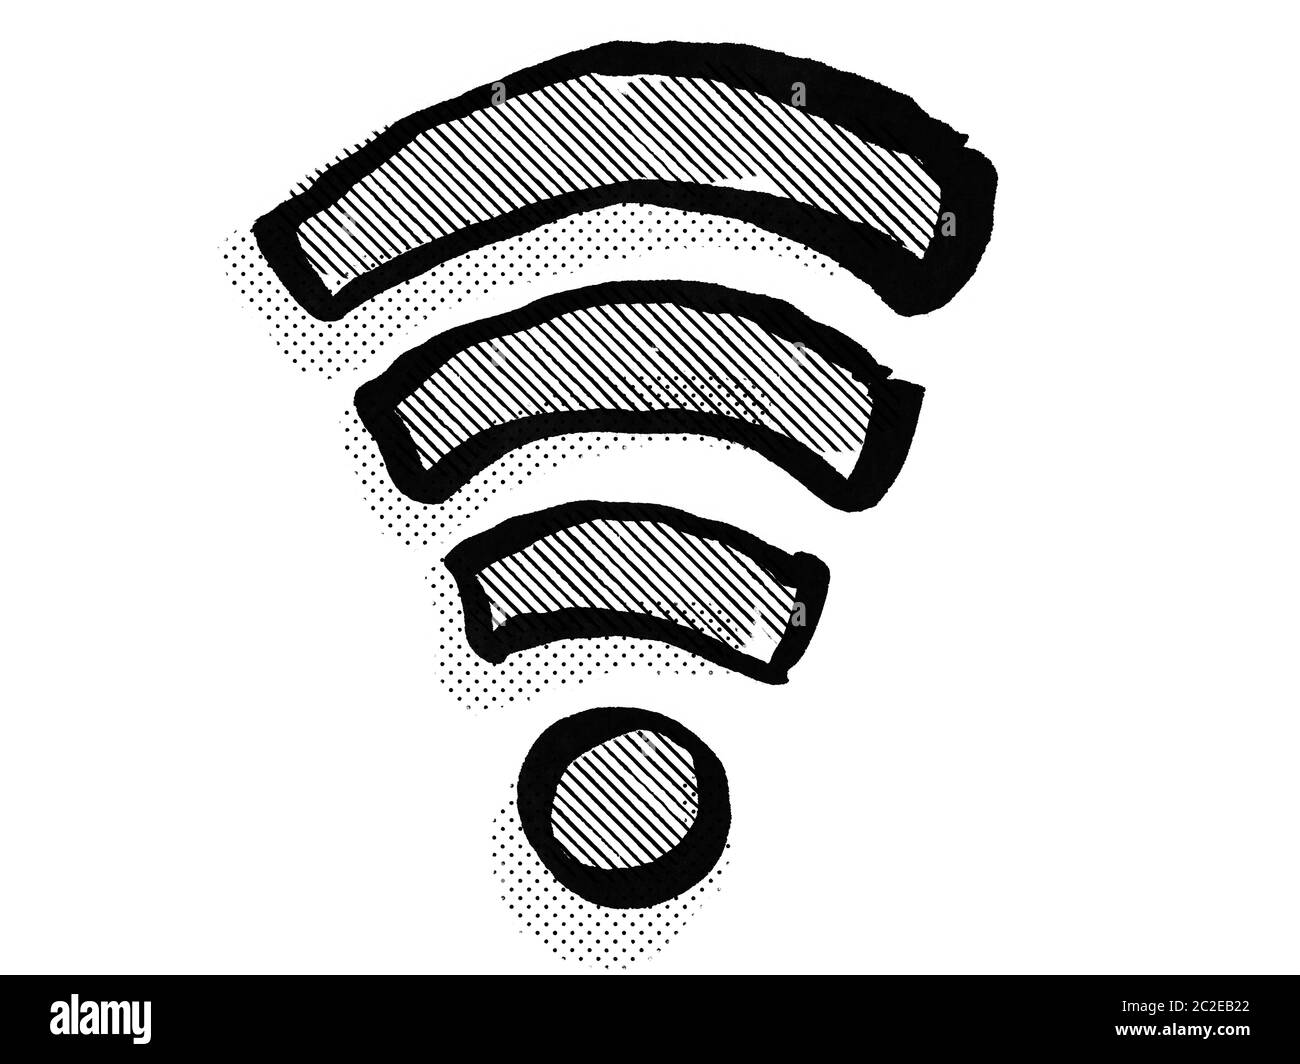 Retro cartoon style drawing of a wifi internet connection symbol icon on isolated white background done in black and white Stock Photo